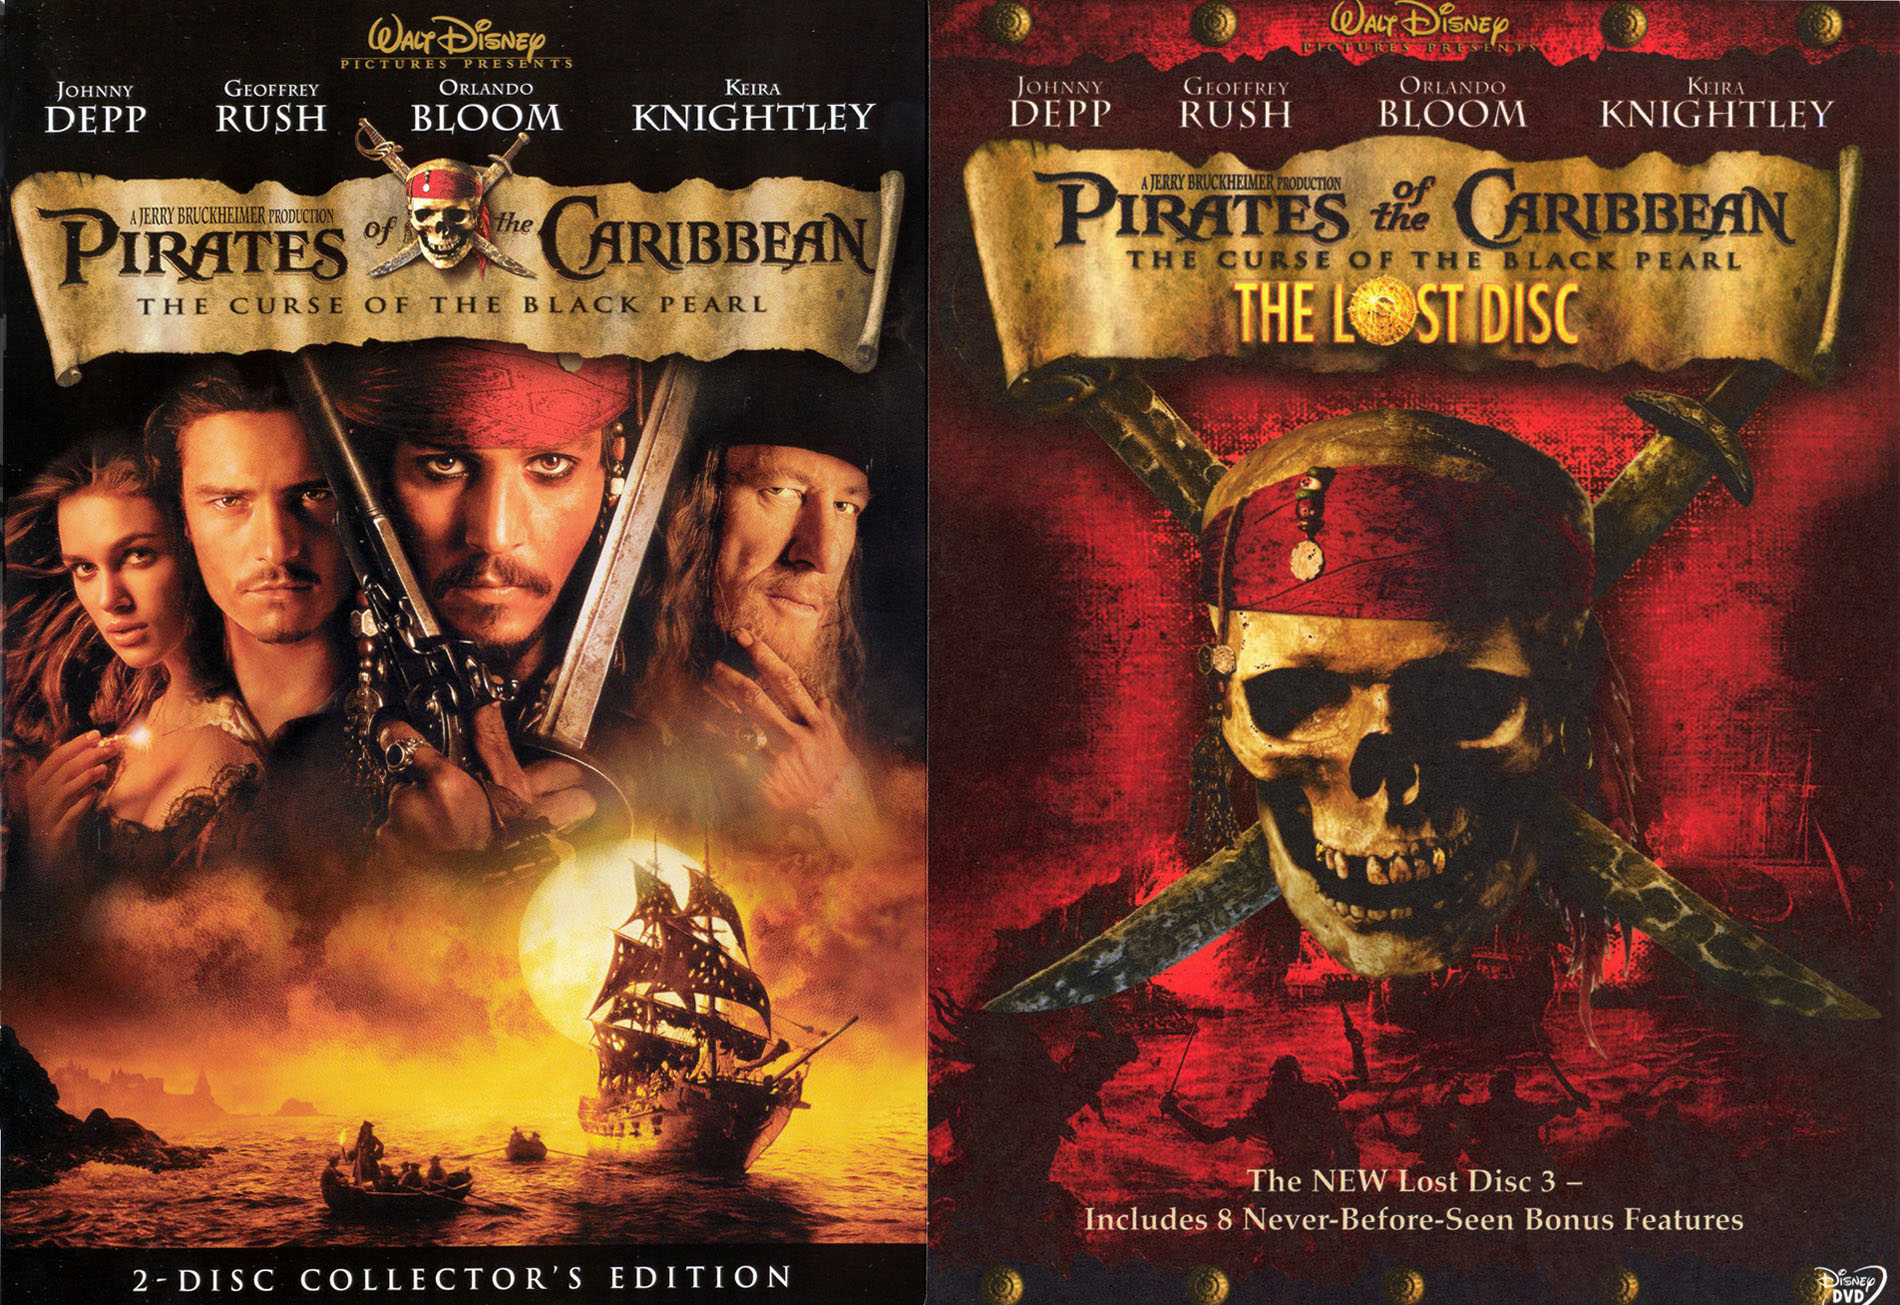 Pirates of the Caribbean: The Curse of the Black Pearl (DVD, 2003, 2-Disc)  New! 786936224306